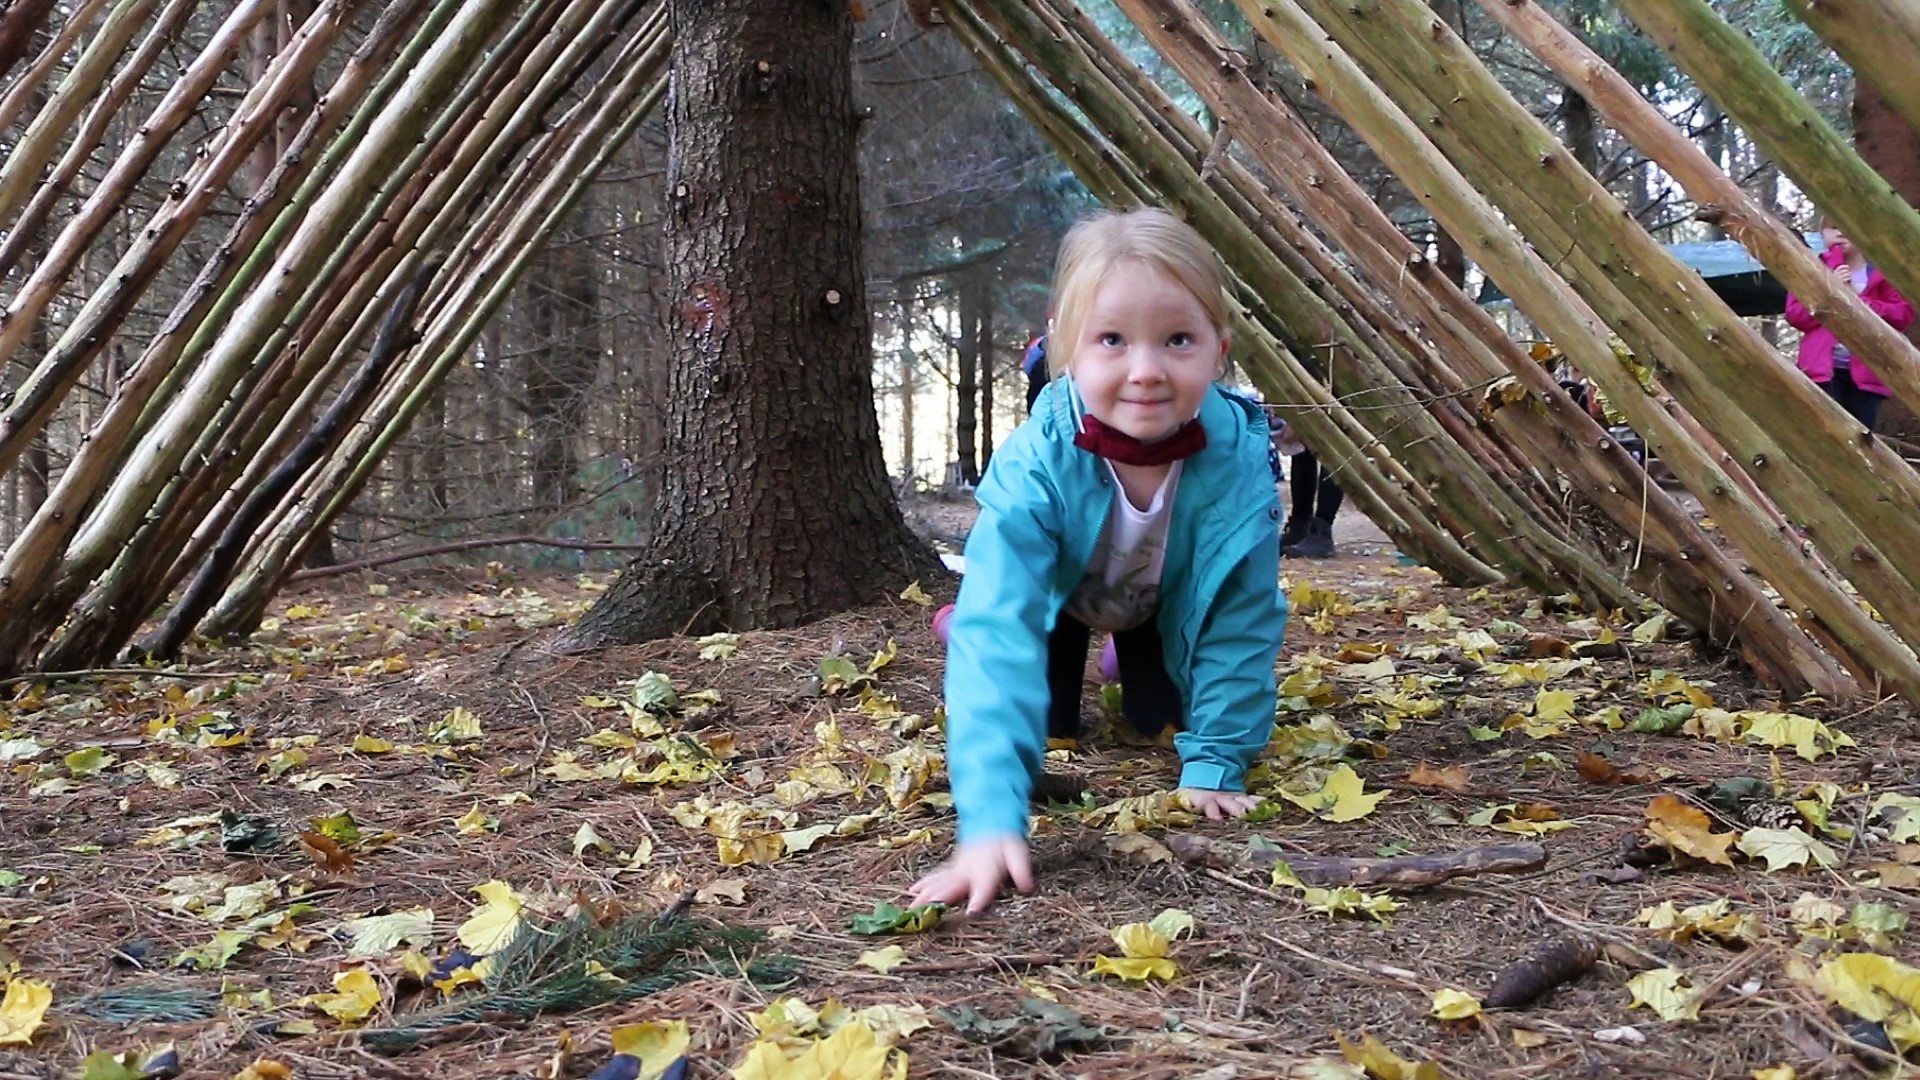 Child crawling through a tunnel made of branches in the woods